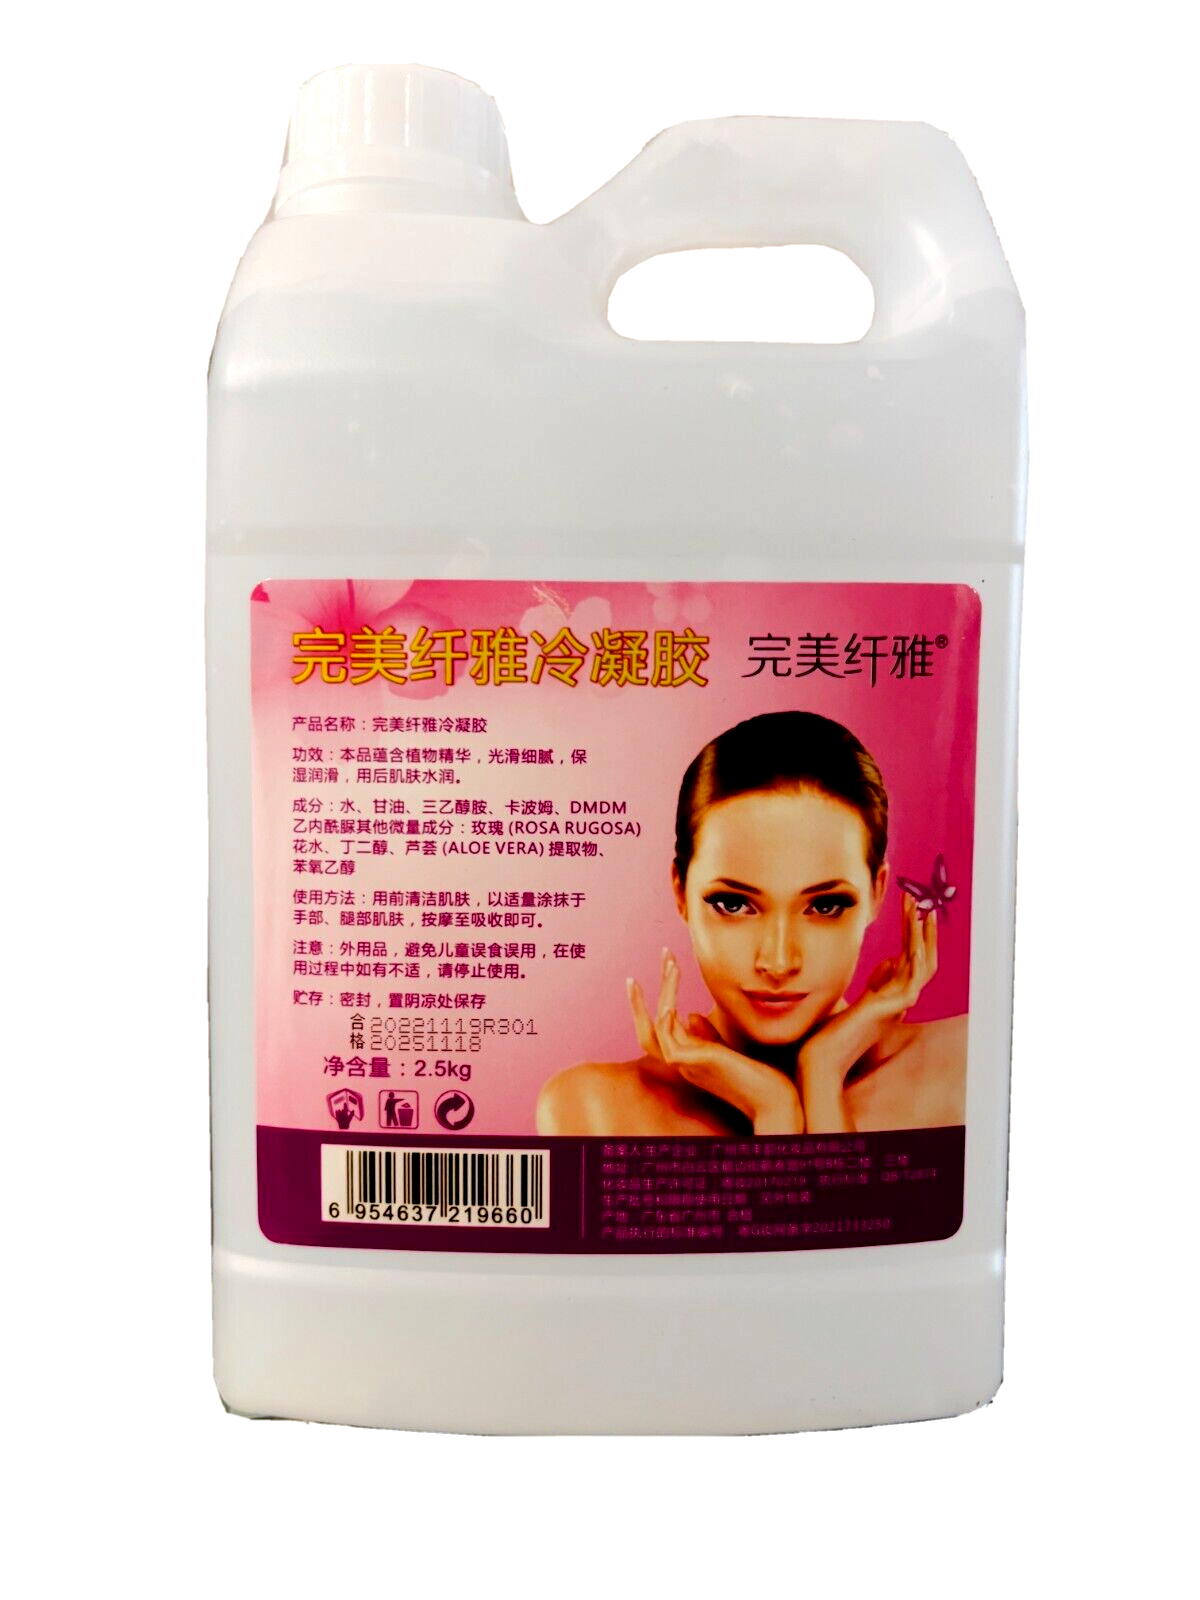 1 Gallon Cooling Gel for Laser Hair Removal Device and For Salons and Spas  | eBay